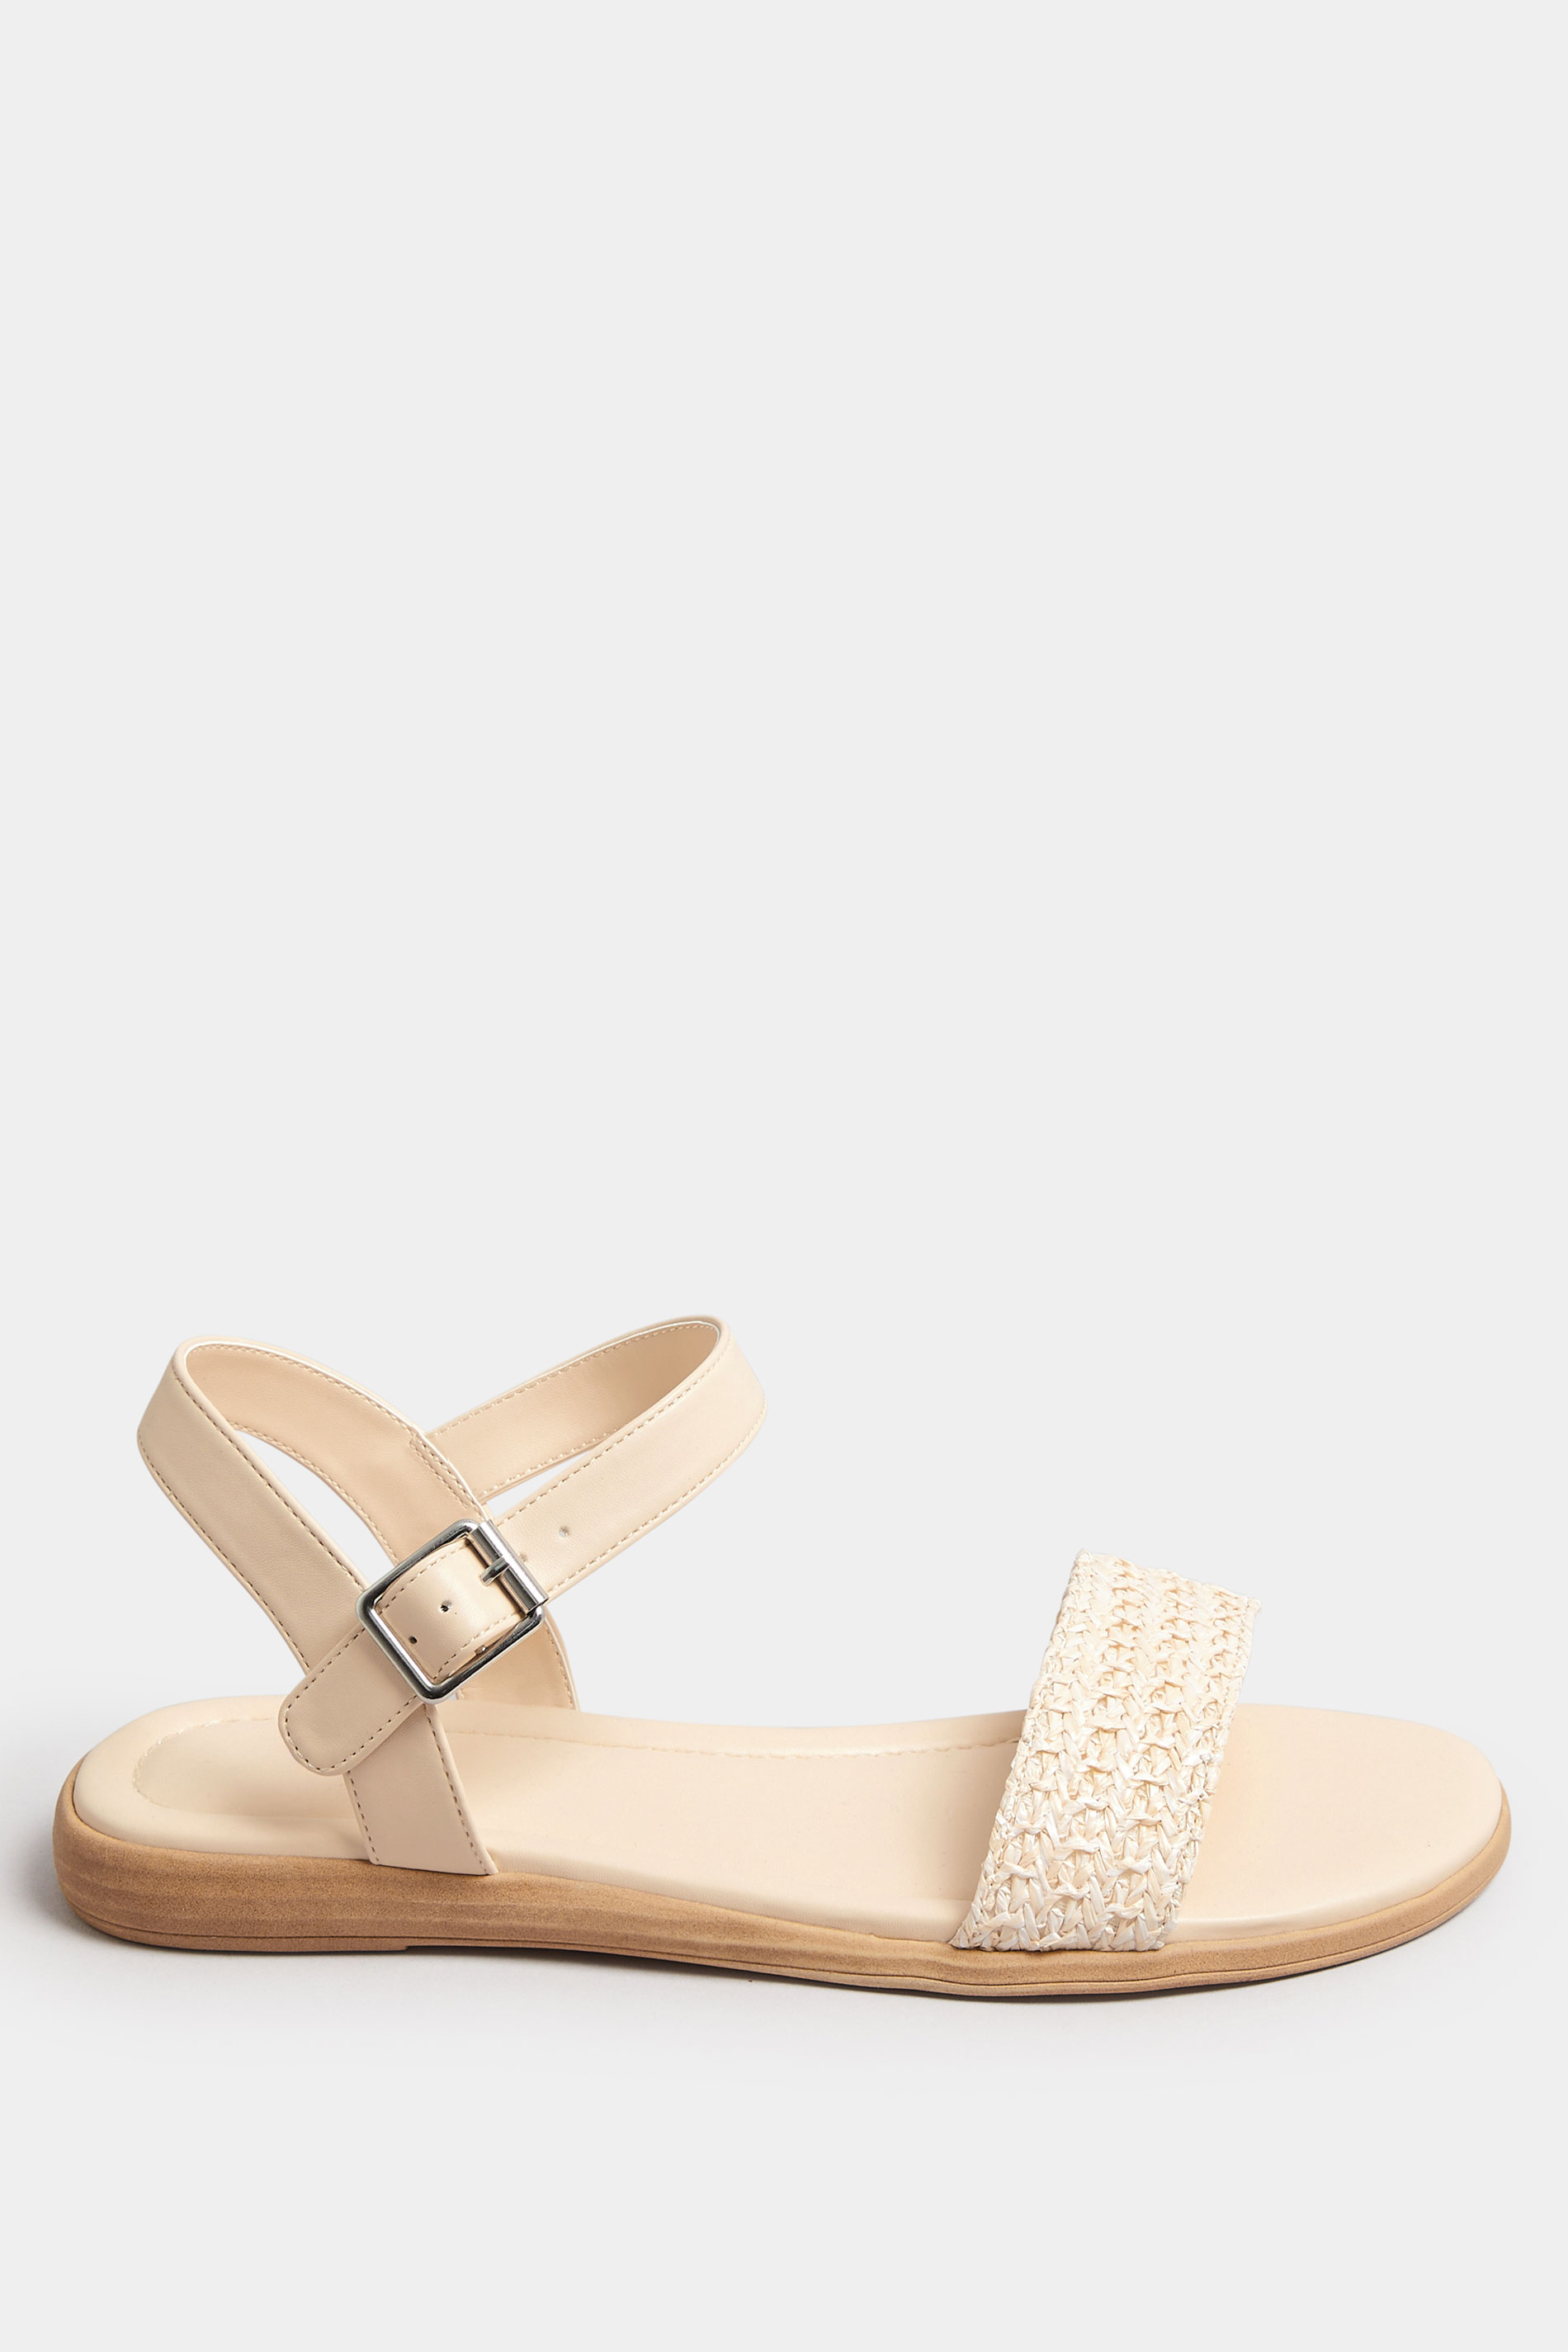 White Raffia Sandals In Extra Wide EEE Fit | Yours Clothing 3